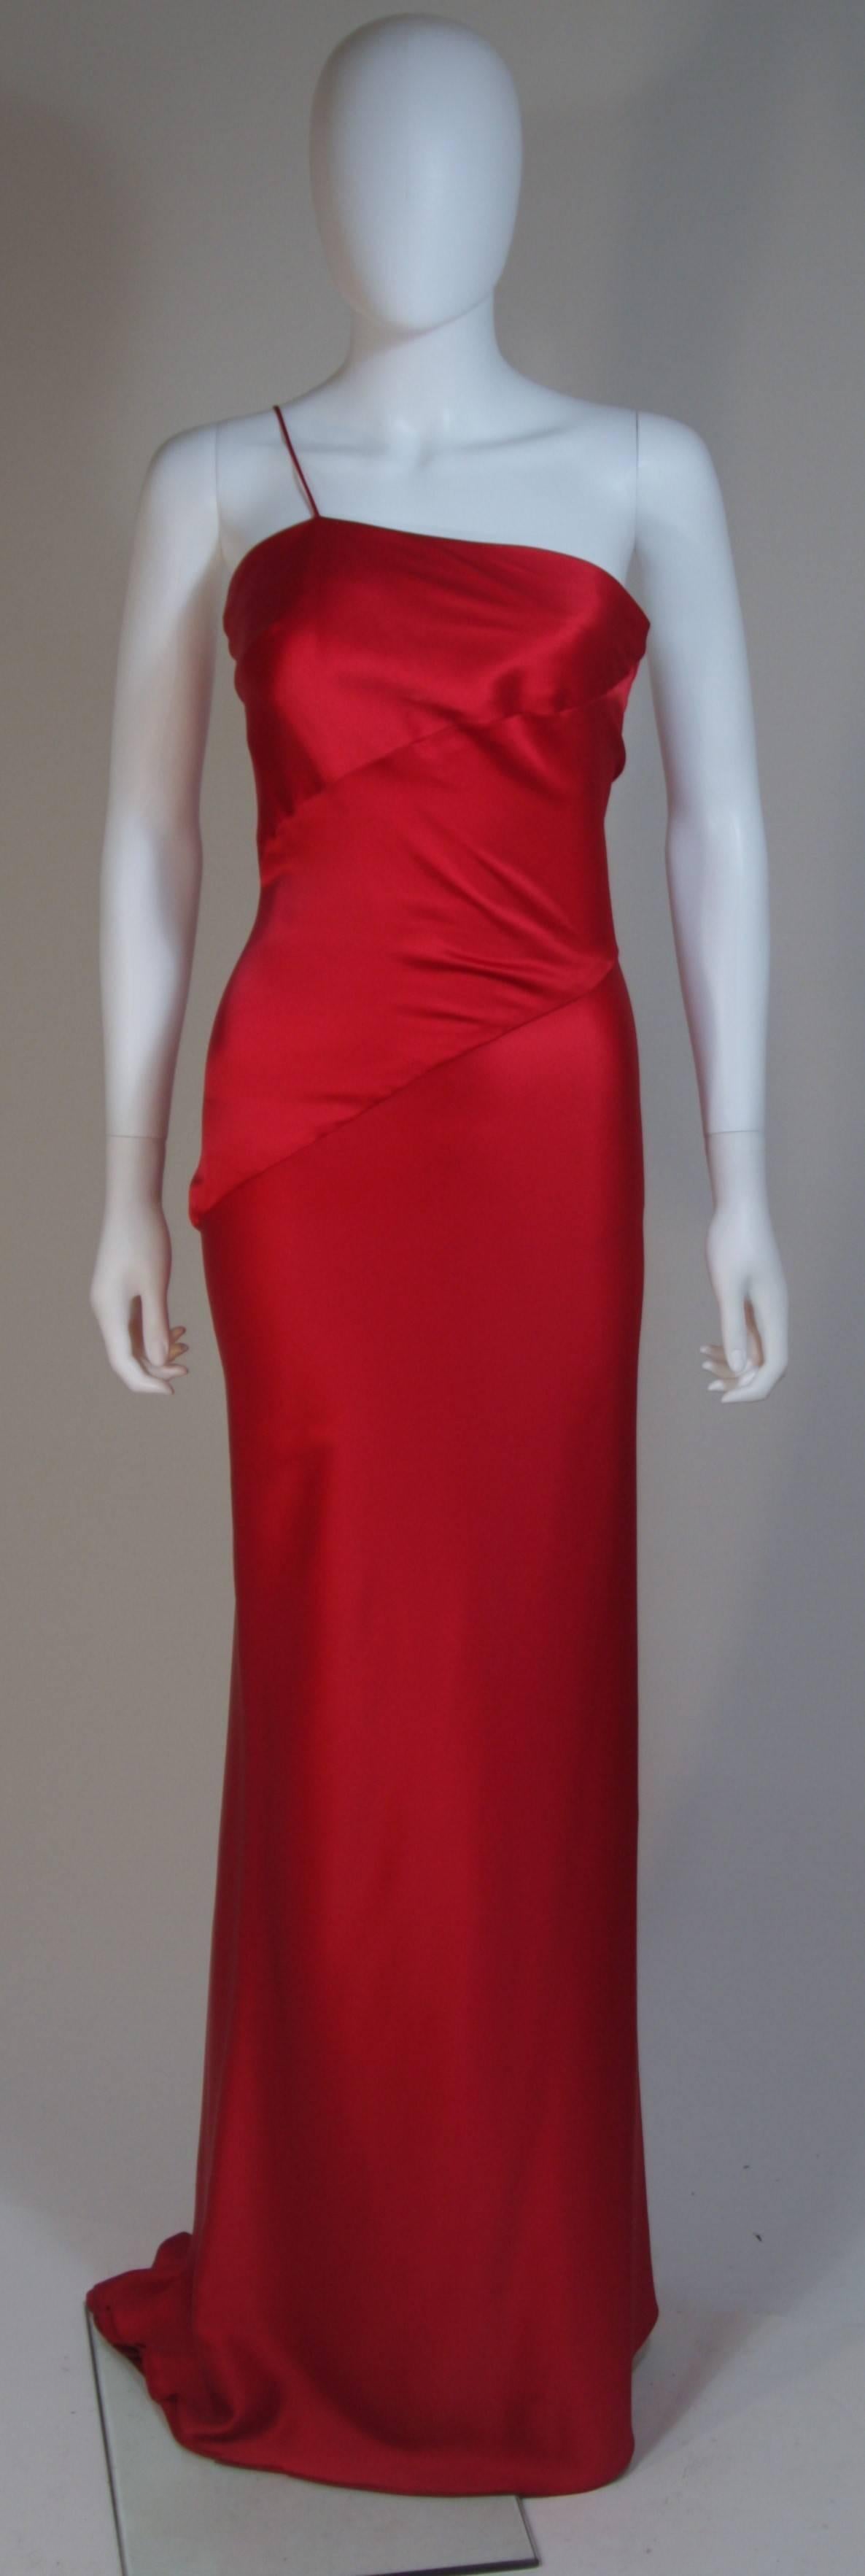  This Cantu & Castillo gown is composed of a red bias cut silk. Features an asymmetrical one shoulder strap design. In excellent condition. 

  **Please cross-reference measurements for personal accuracy. Size in description box is an